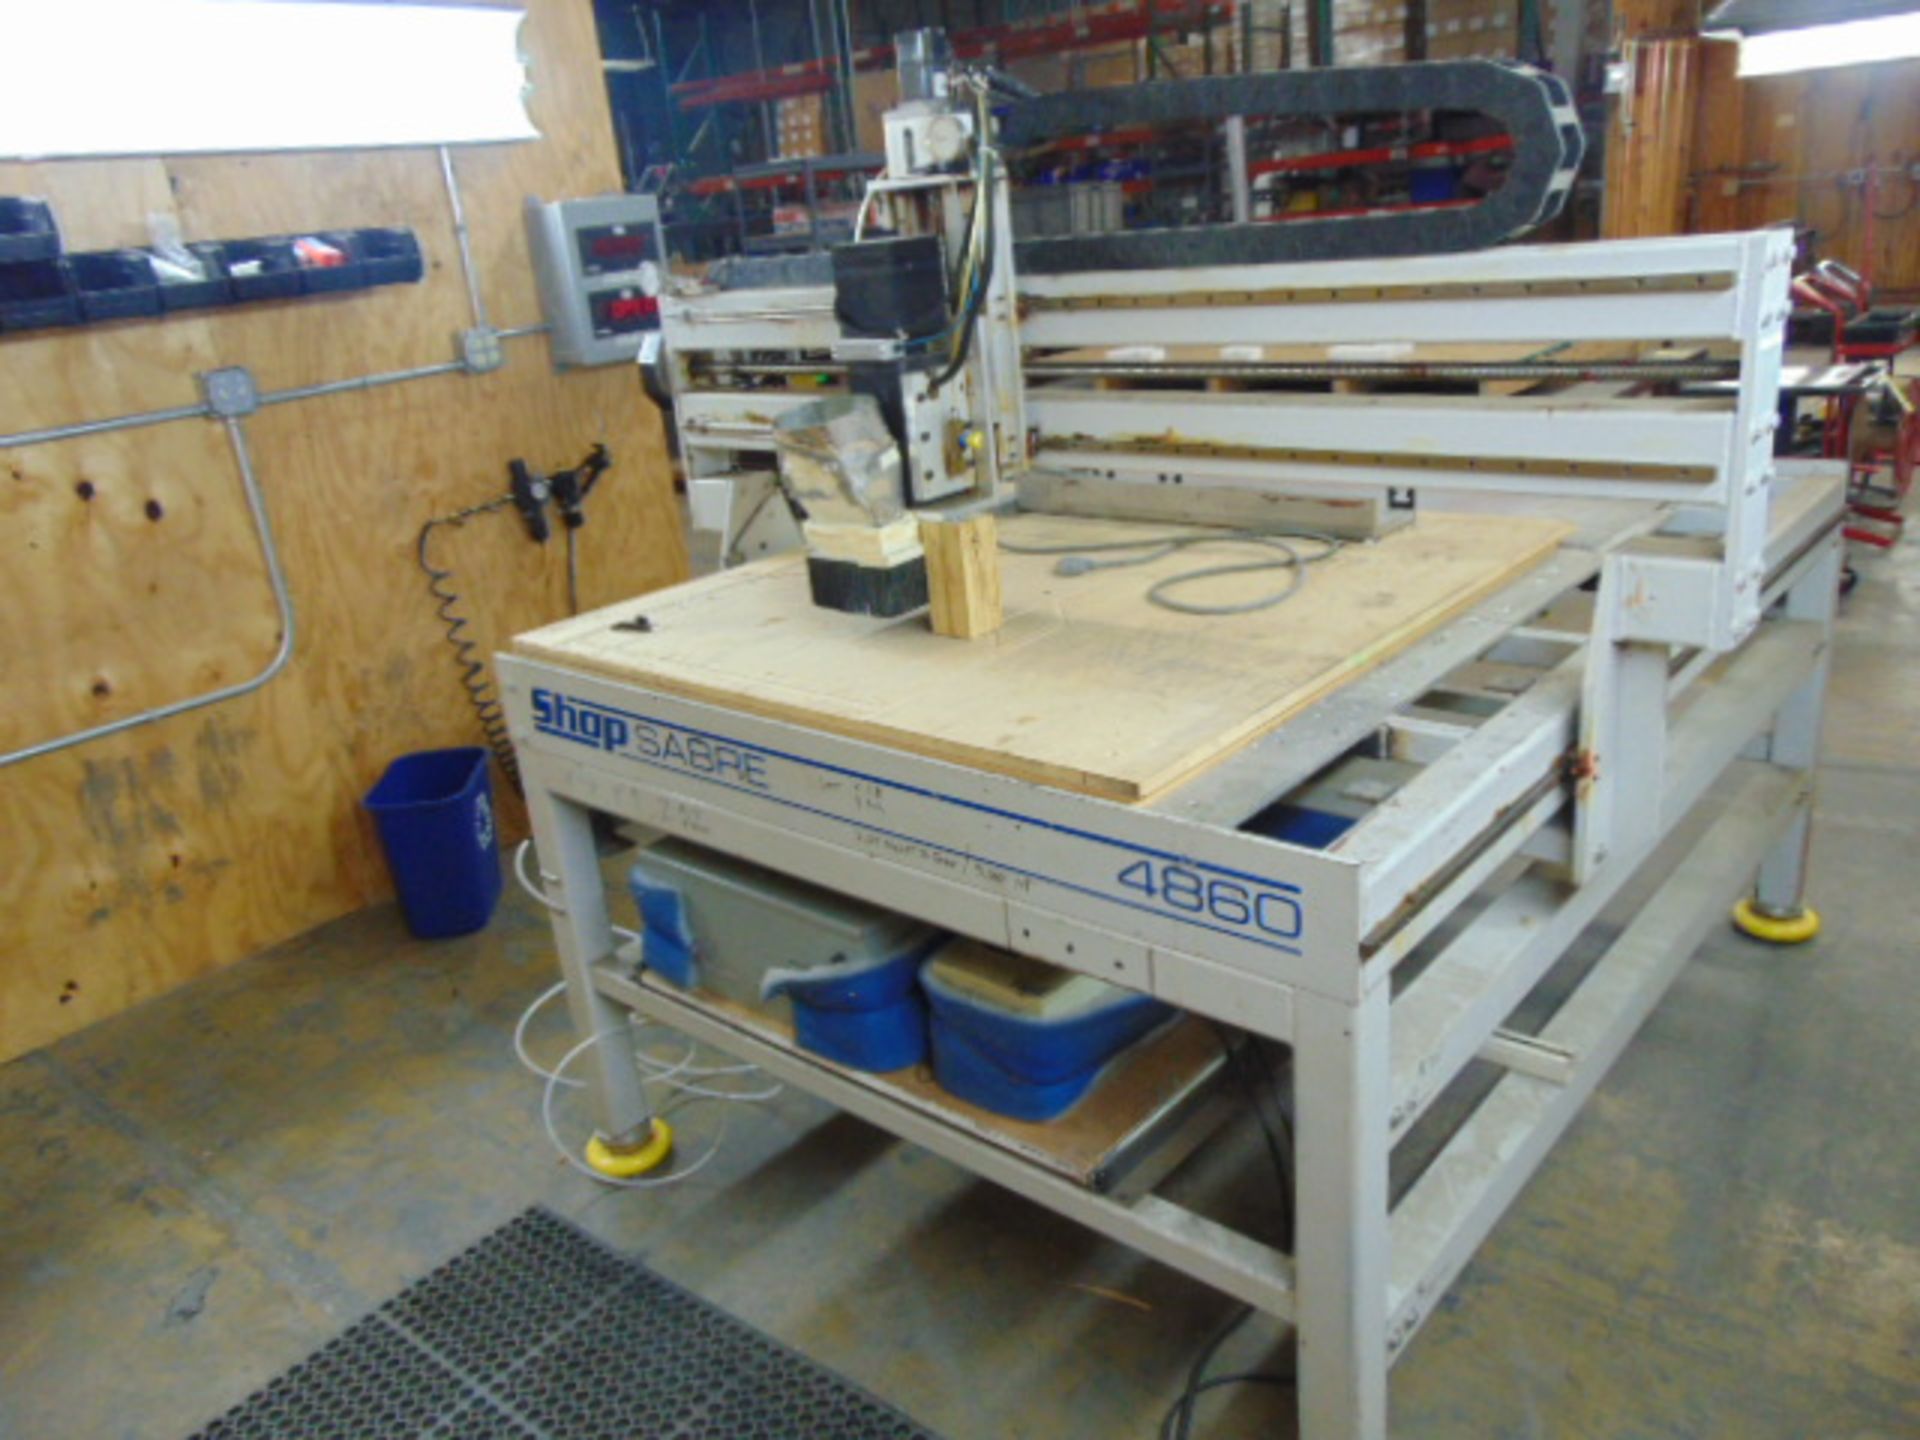 PROGRAMMABLE ROUTER TABLE, SHOP SABRE MDL. 4860 (no computer) - Image 2 of 6